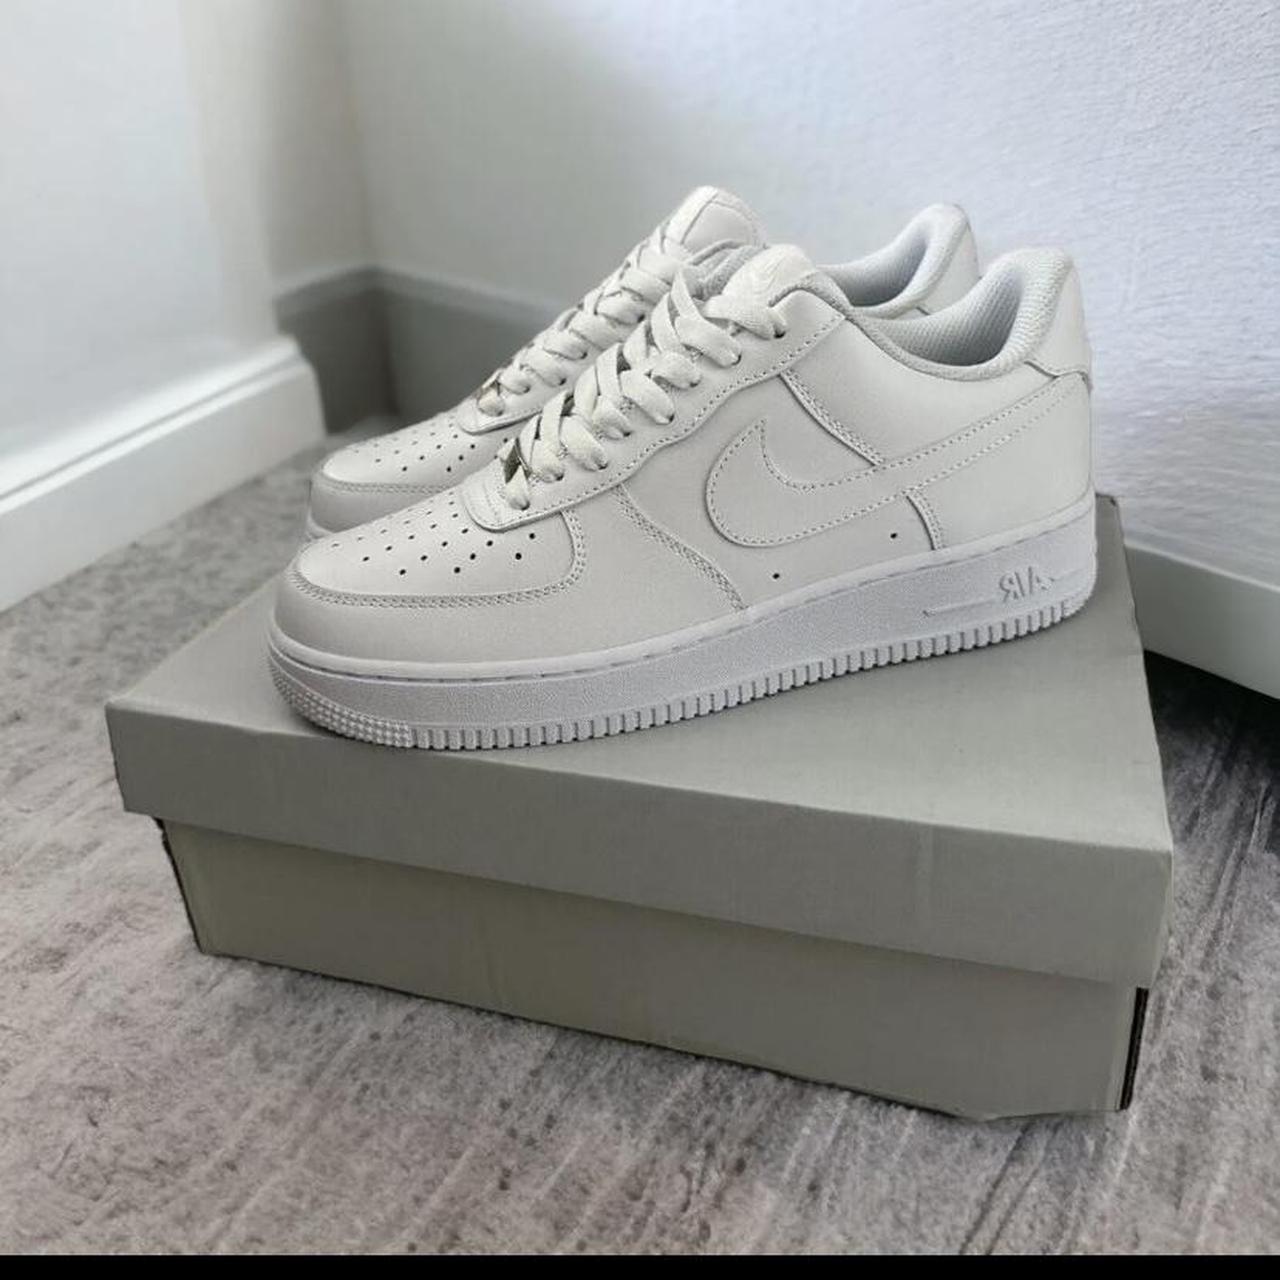 White airforce 1s New not worn Comes with box - Depop